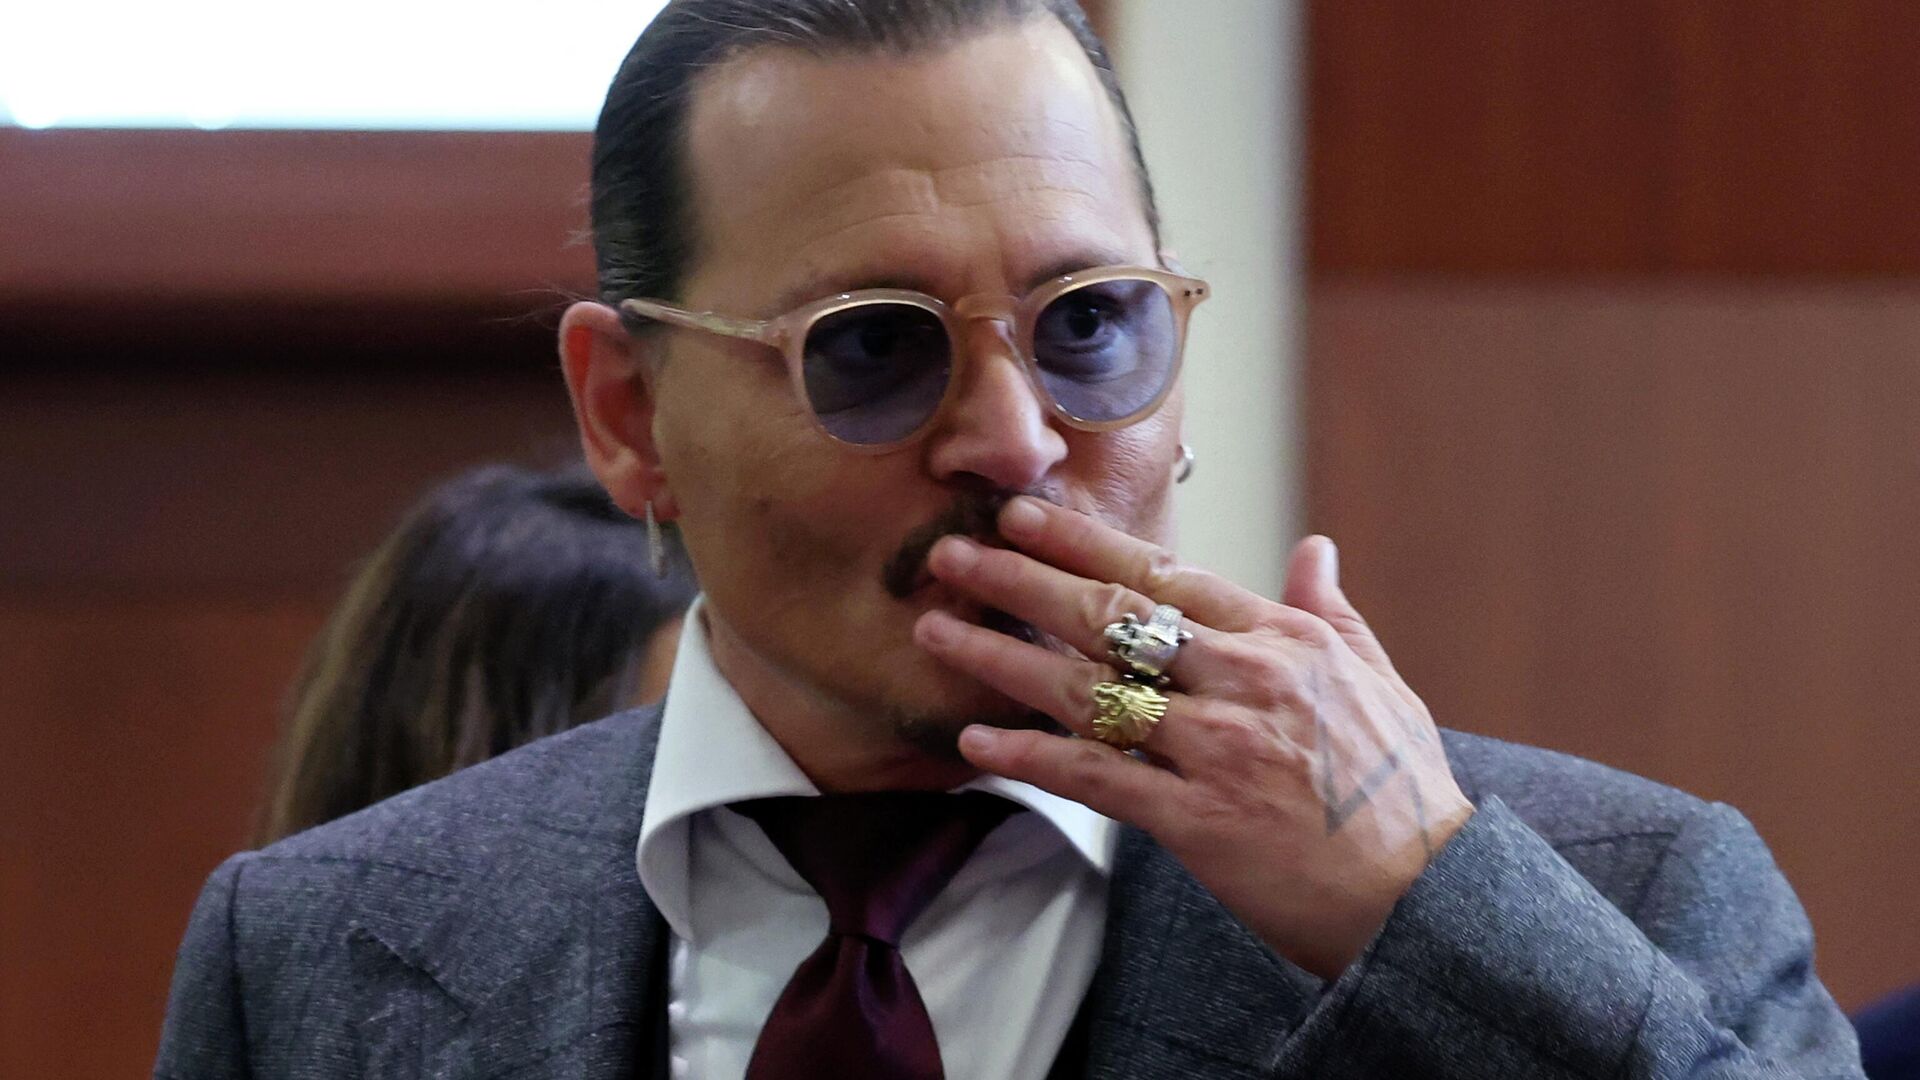 US actor Johnny Depp reacts to fans in the courtroom as court finishes for the day during the 50 million US dollar Depp vs Heard defamation trial at the Fairfax County Circuit Court in Fairfax, Virginia, April 28, 2022 - Sputnik International, 1920, 23.05.2022